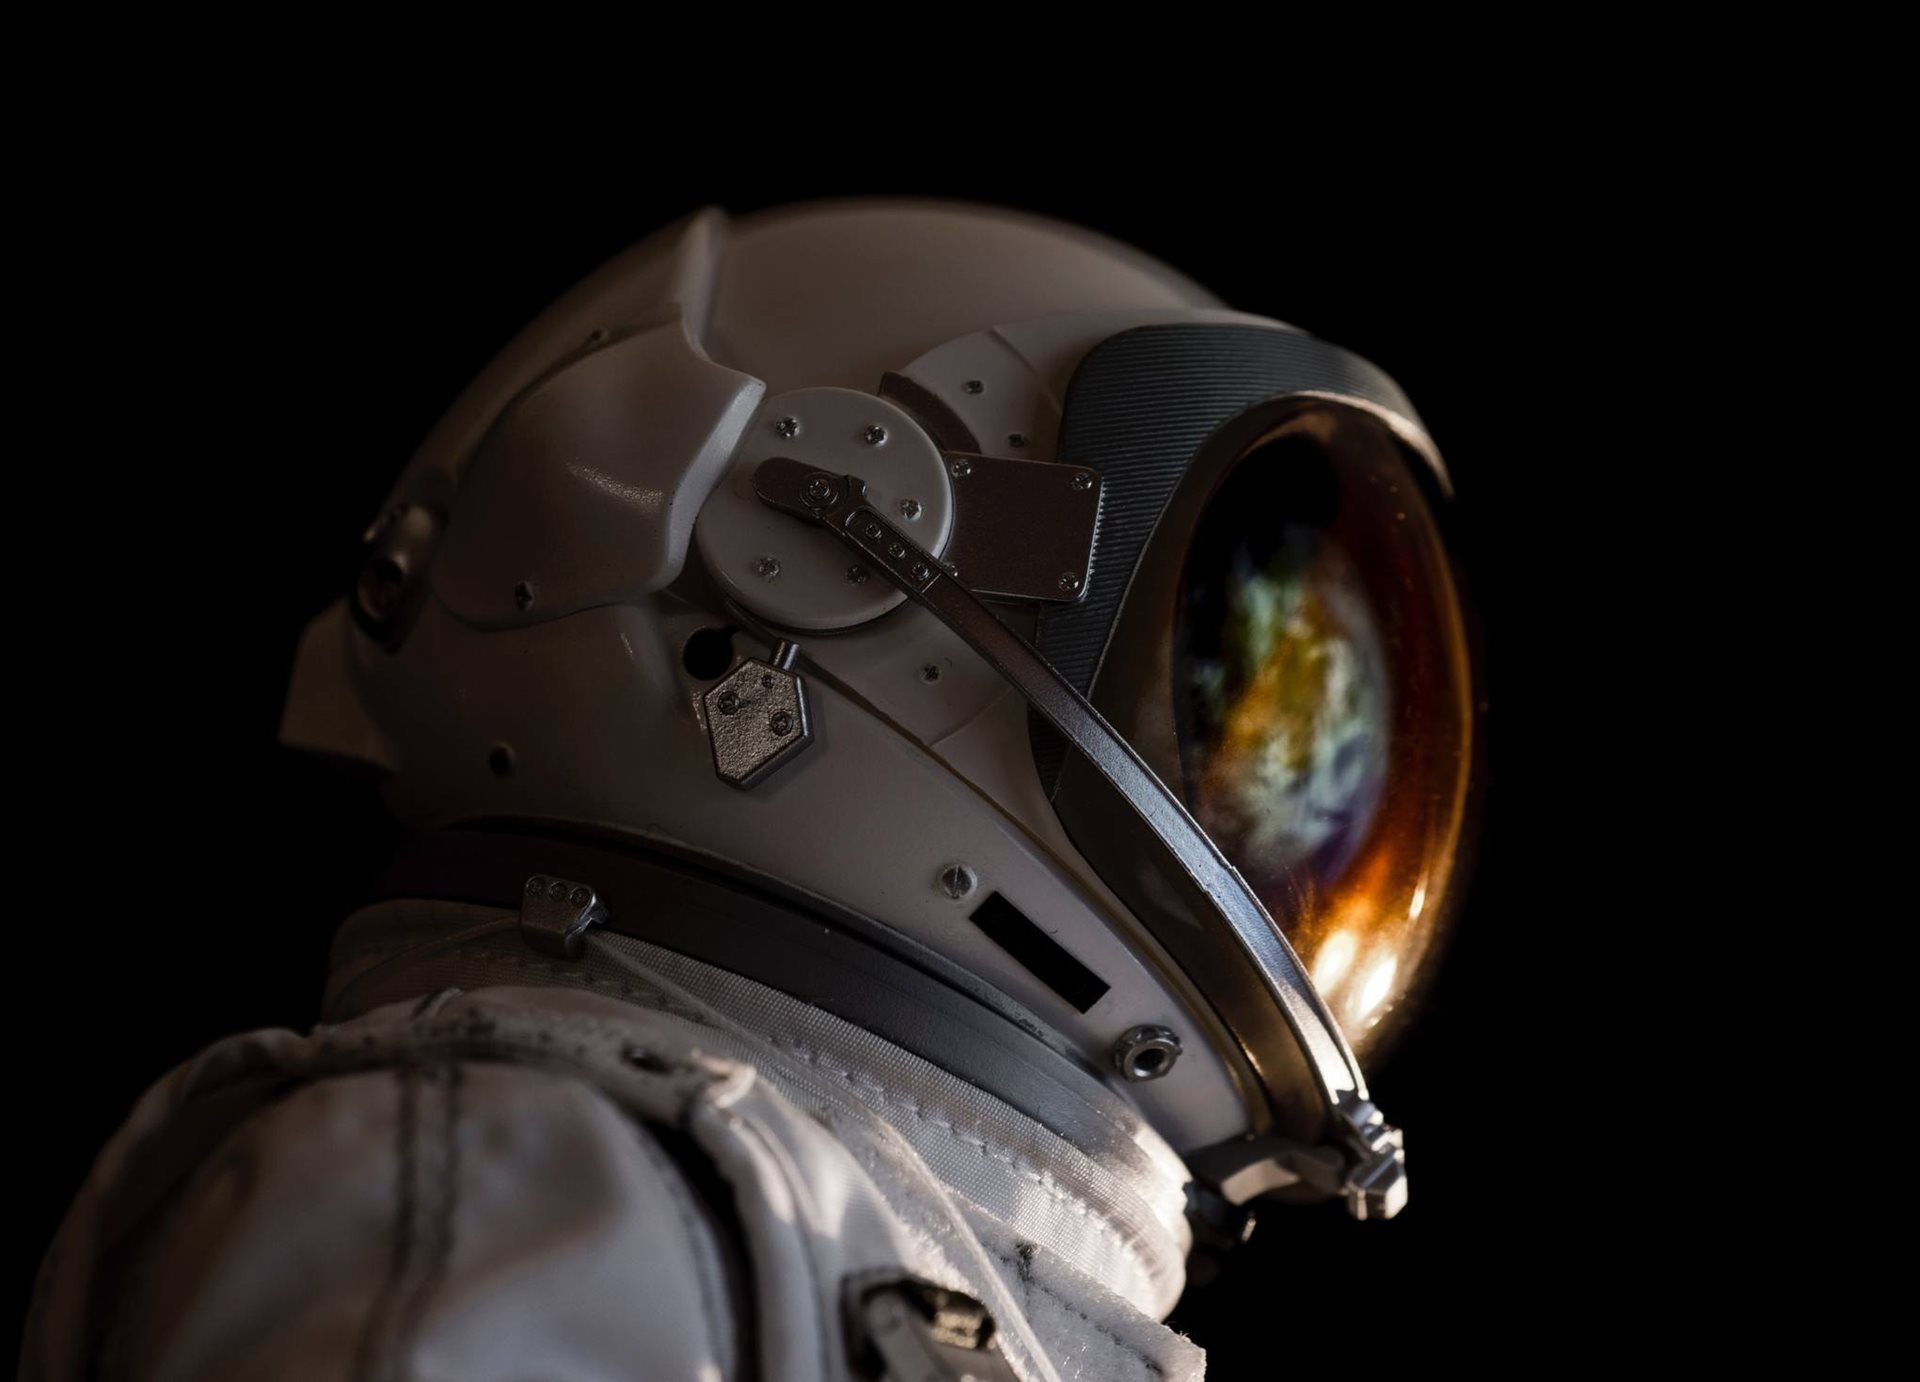 Aerospace Engineering grad student Logan Kluis part of a research team with Texas A&M and Cornell researchers designing a safer and better space suit teaser image